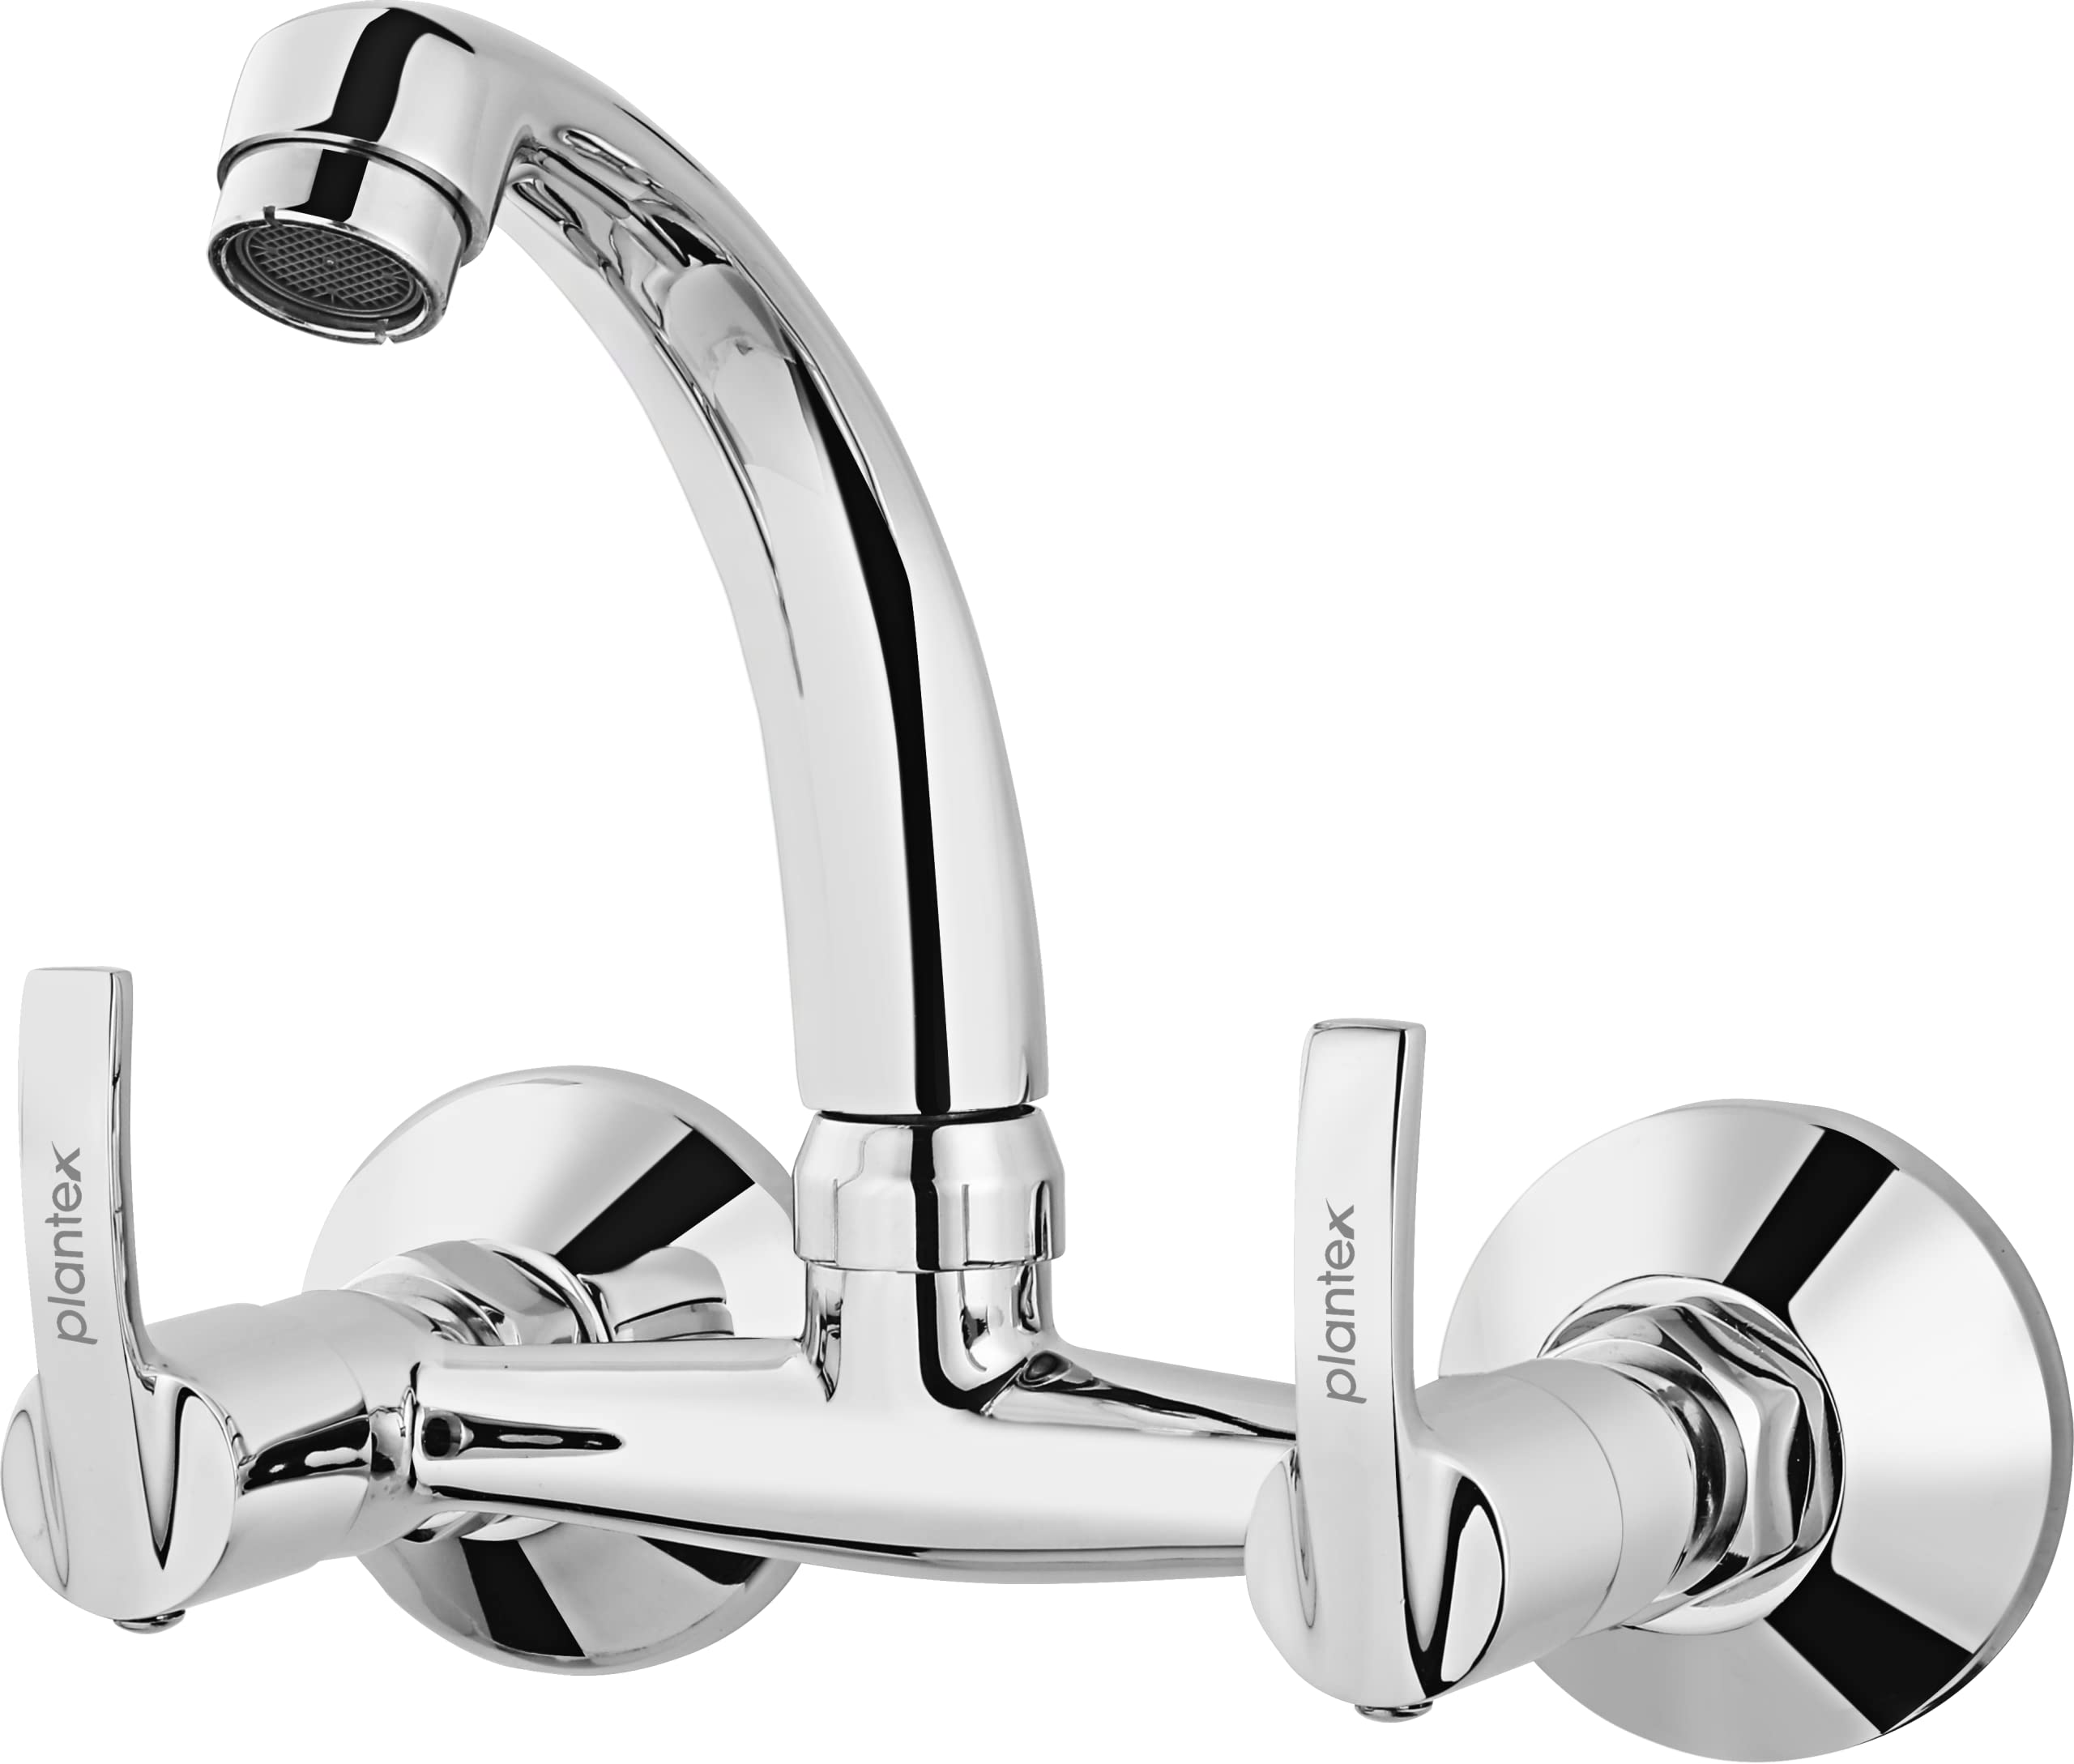 Plantex AQ-1414 Pure Brass Sink Mixer with (High Arch 360 Degree) Swivel Spout Double Handle Hot and Cold Water Tap for Bathroom/Basin Faucet Tap/Kitchen Sink With Brass Wall Flange & Teflon Tape (Mirror-Chrome Finish)